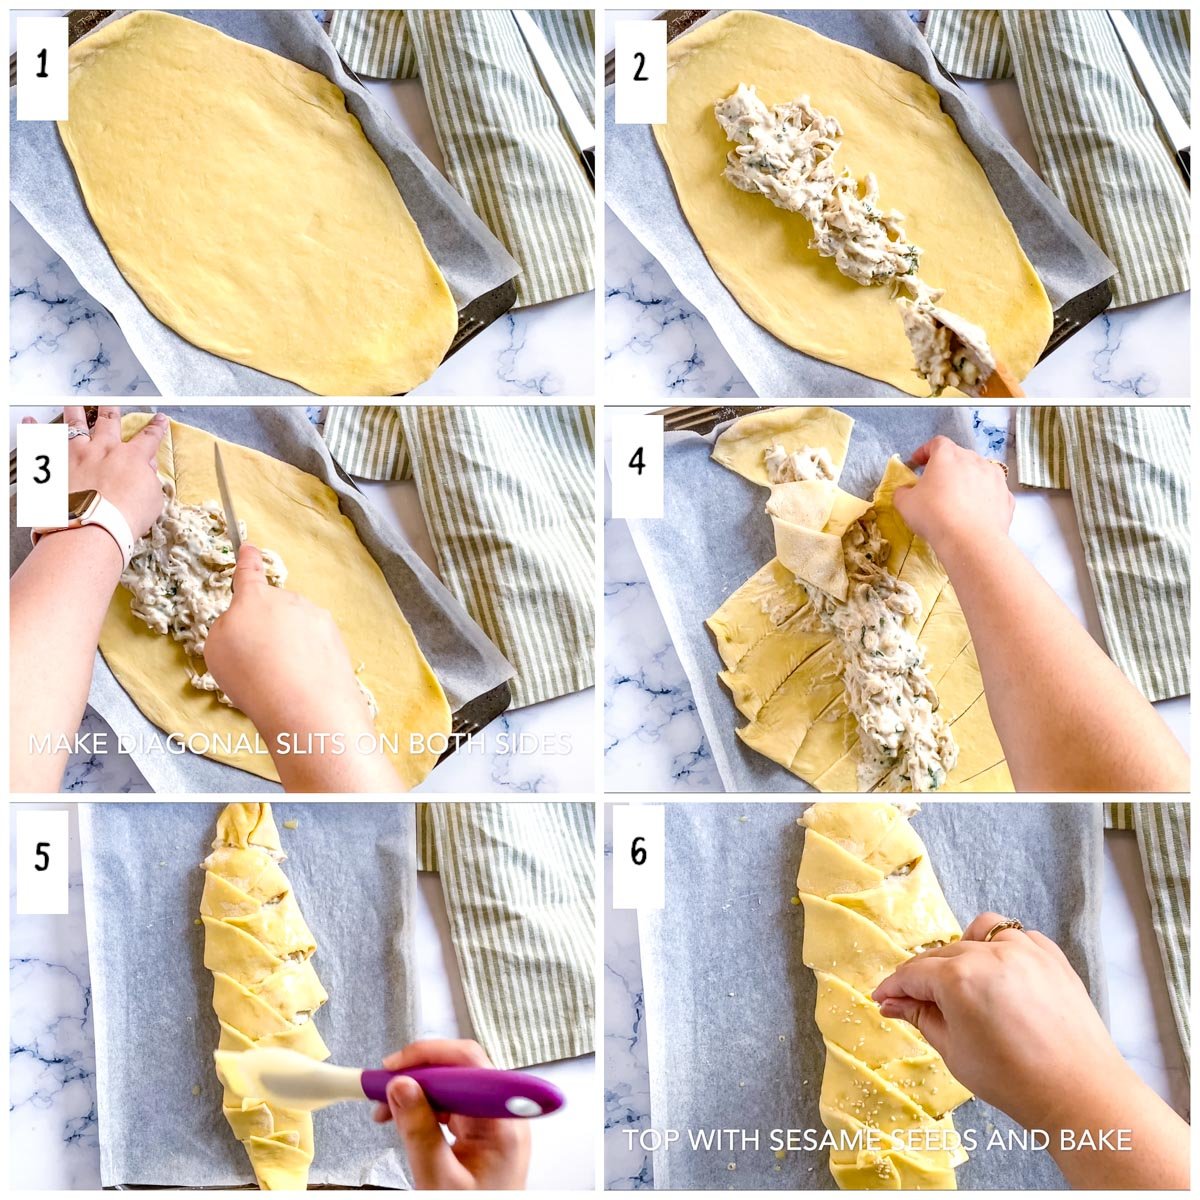 How to assemble the chicken bread.